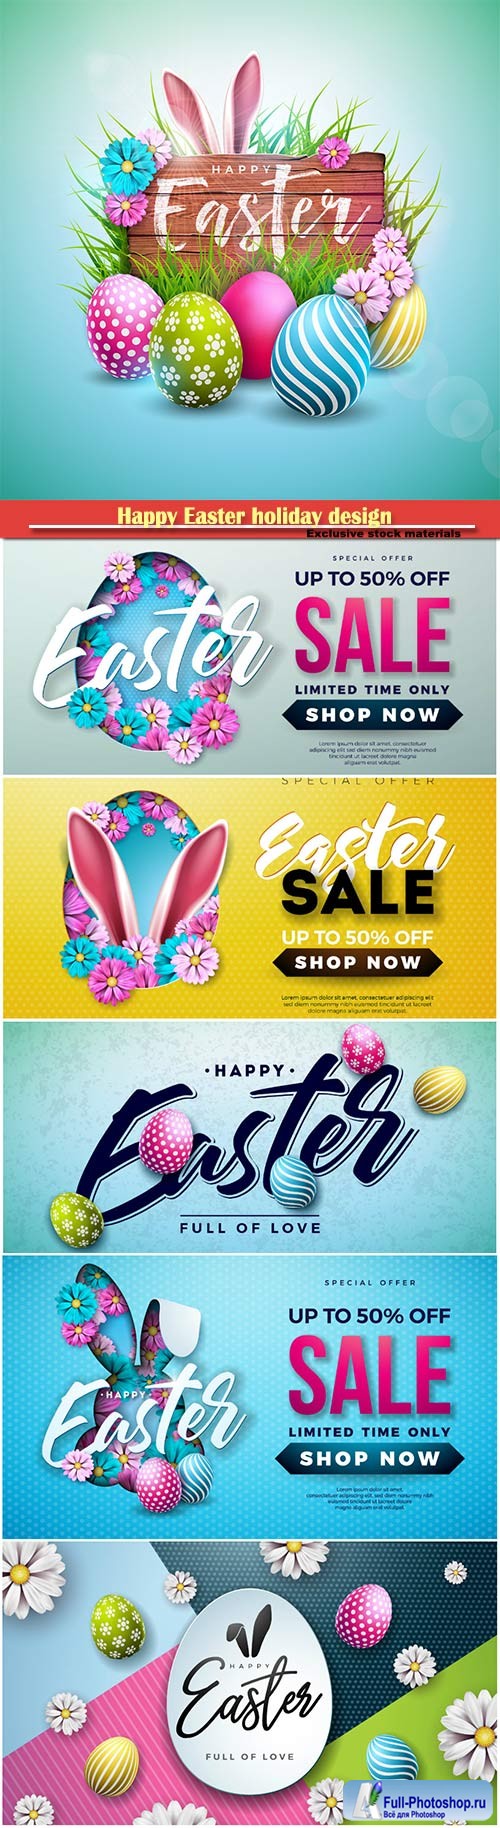 Happy Easter holiday design with painted egg vector illustration